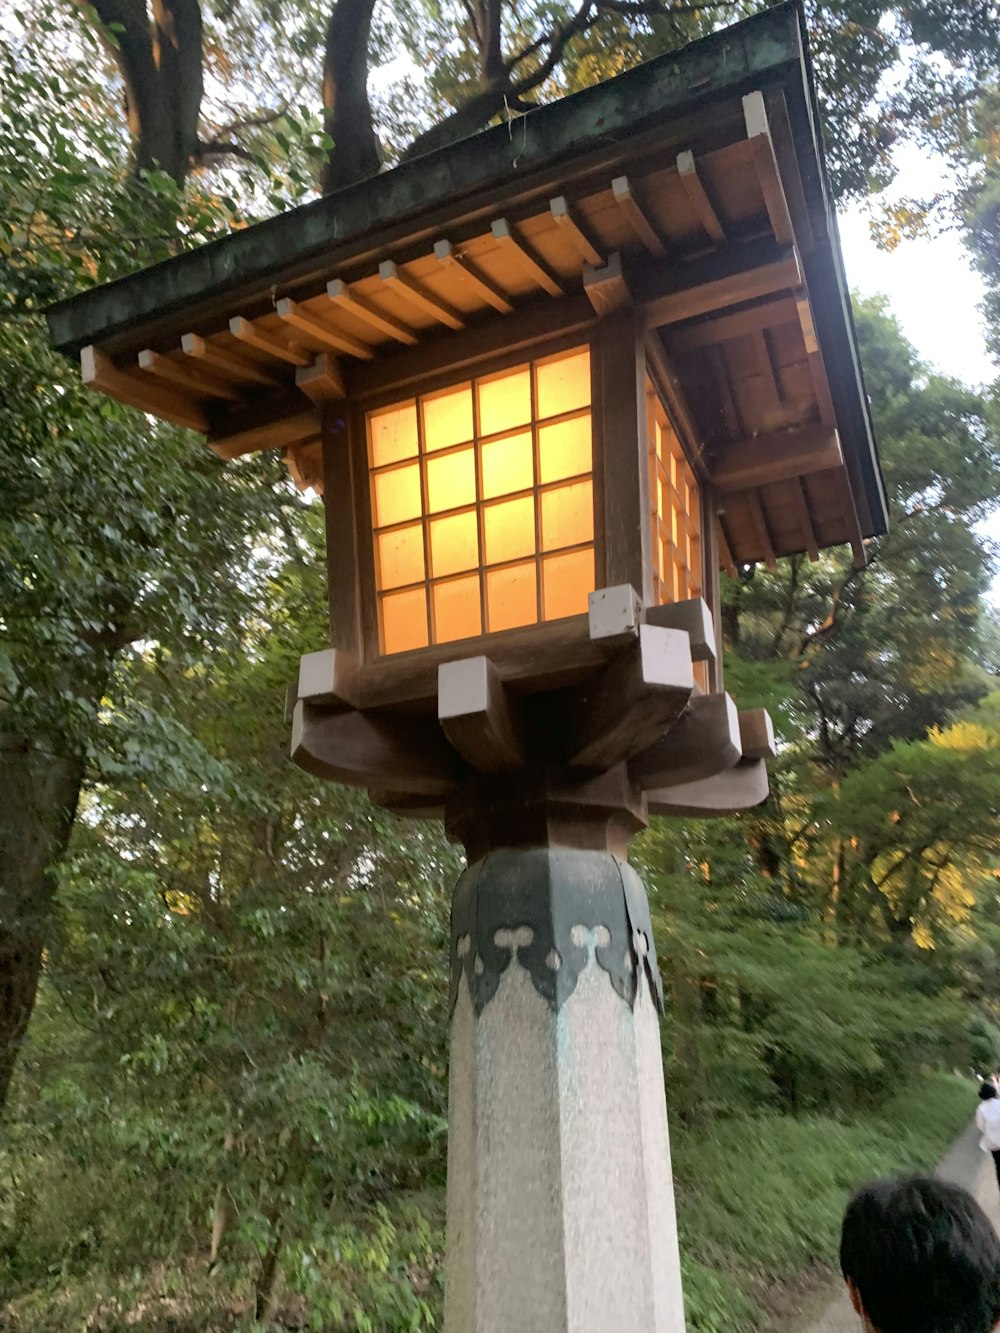 a small wooden structure with a window on top of it